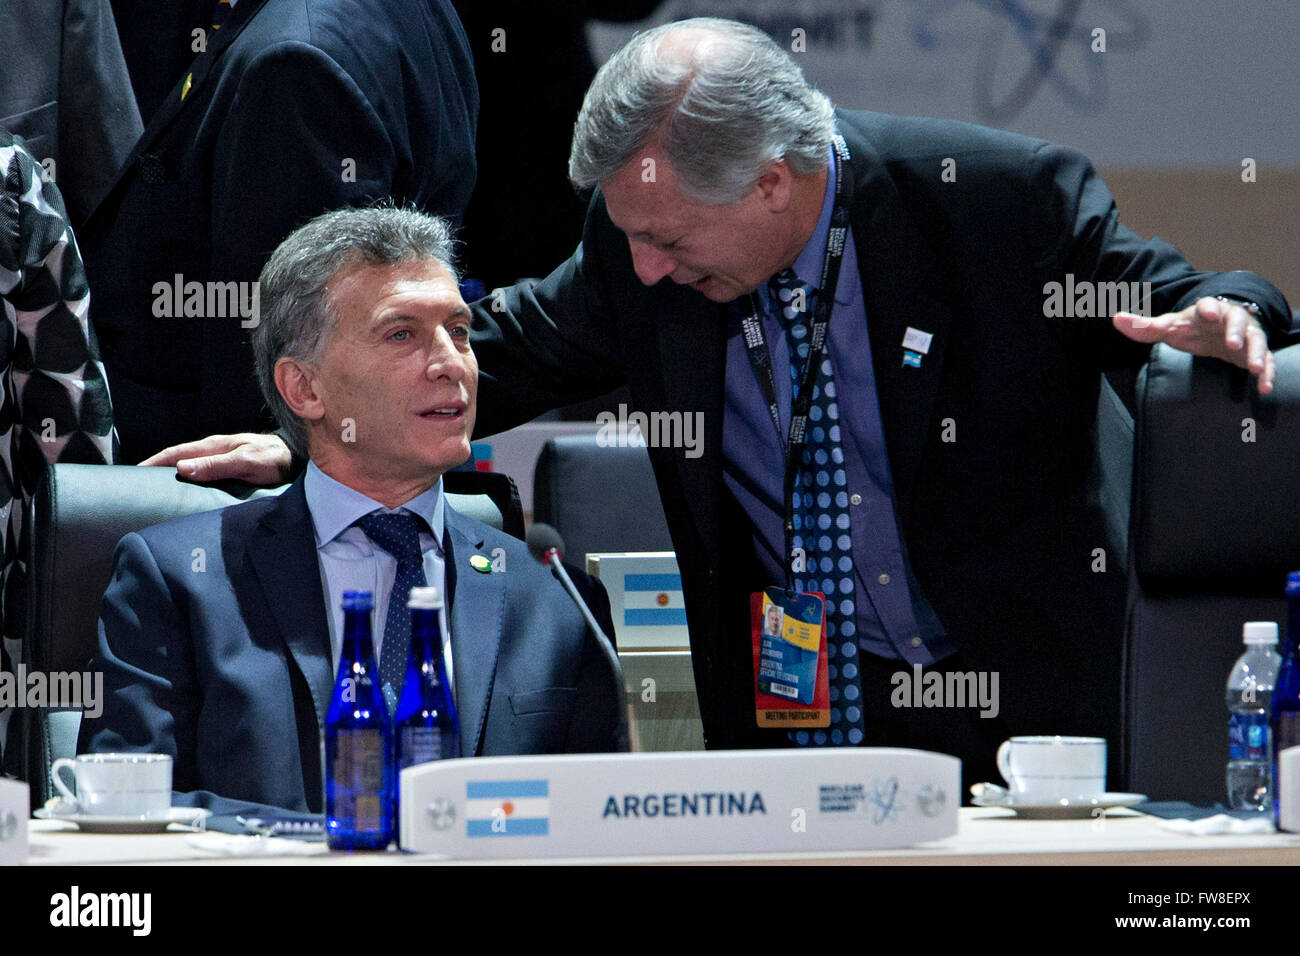 Washington, DC, USA. 1st Apr, 2016. Mauricio Macri, Argentina's president, left, waits to begin an opening plenary entitled 'National Actions to Enhance Nuclear Security' at the Nuclear Security Summit in Washington, DC, U.S., on Friday, April 1, 2016. After a spate of terrorist attacks from Europe to Africa, U.S. President Barack Obama is rallying international support during the summit for an effort to keep Islamic State and similar groups from obtaining nuclear material and other weapons of mass destruction. Credit: Andrew Harrer/Pool via CNP - NO WIRE SERVICE - © dpa/Alamy Live News Stock Photo